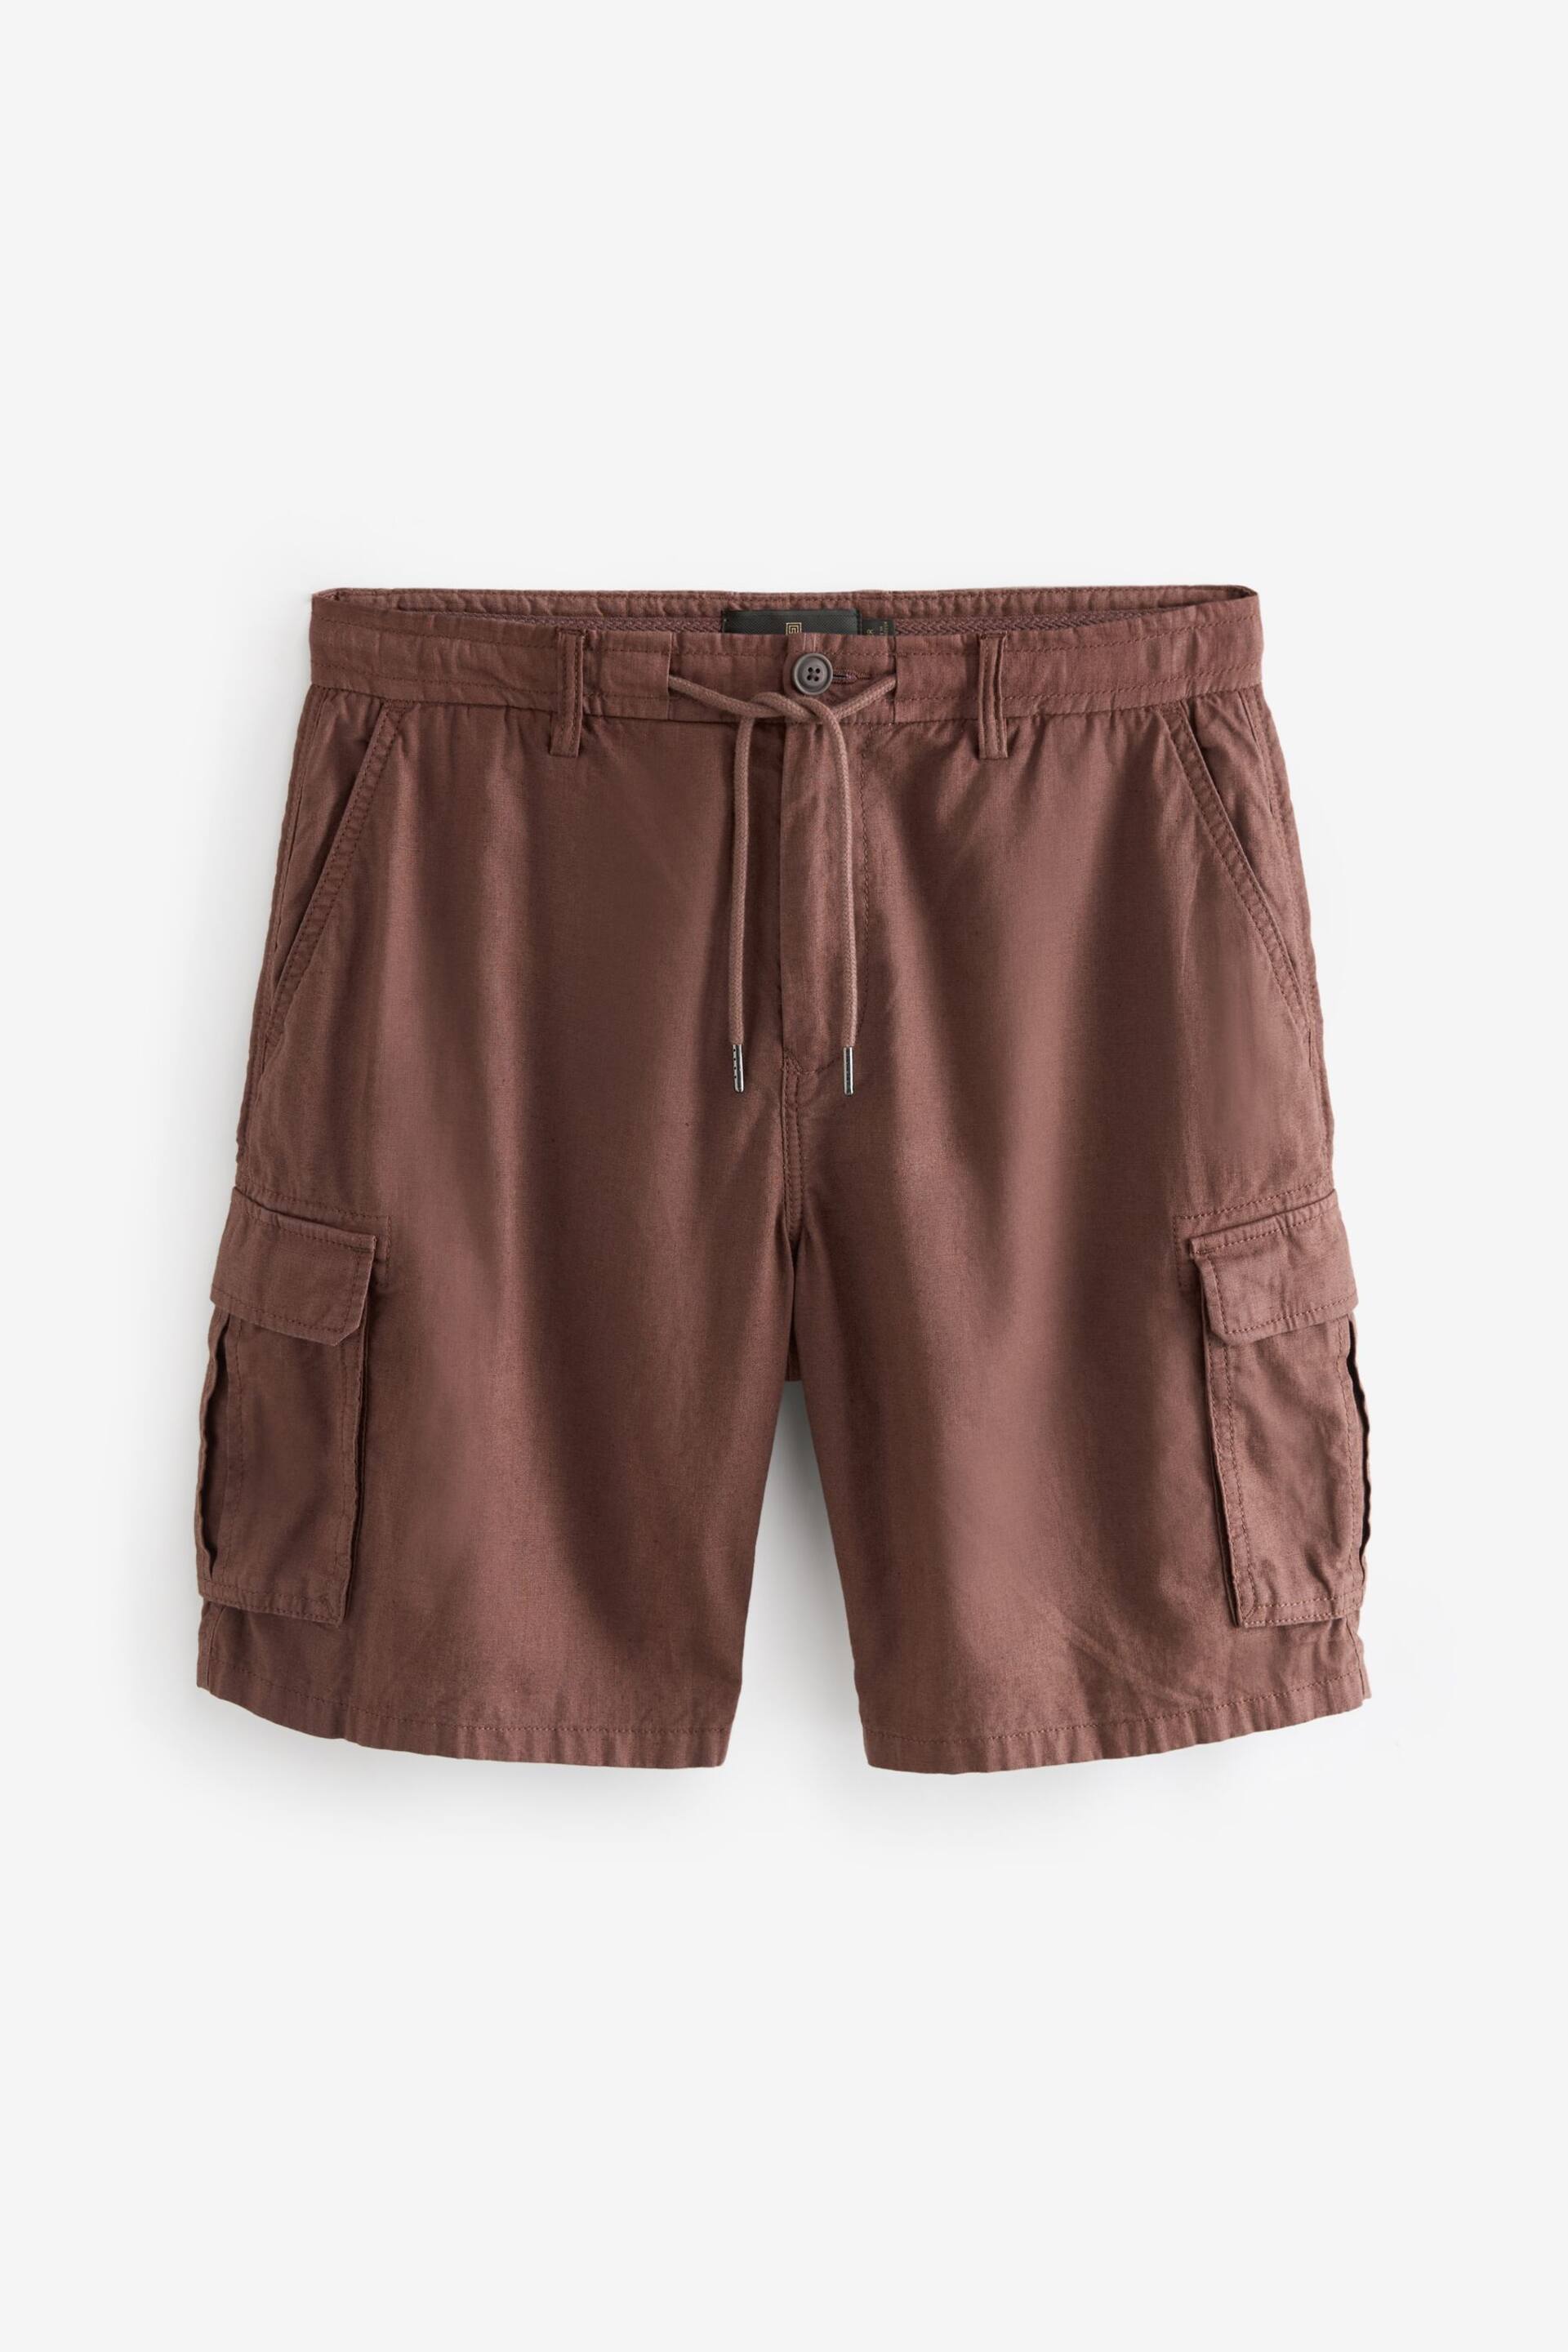 Rust Brown Cotton Linen Cargo Shorts - Image 6 of 10